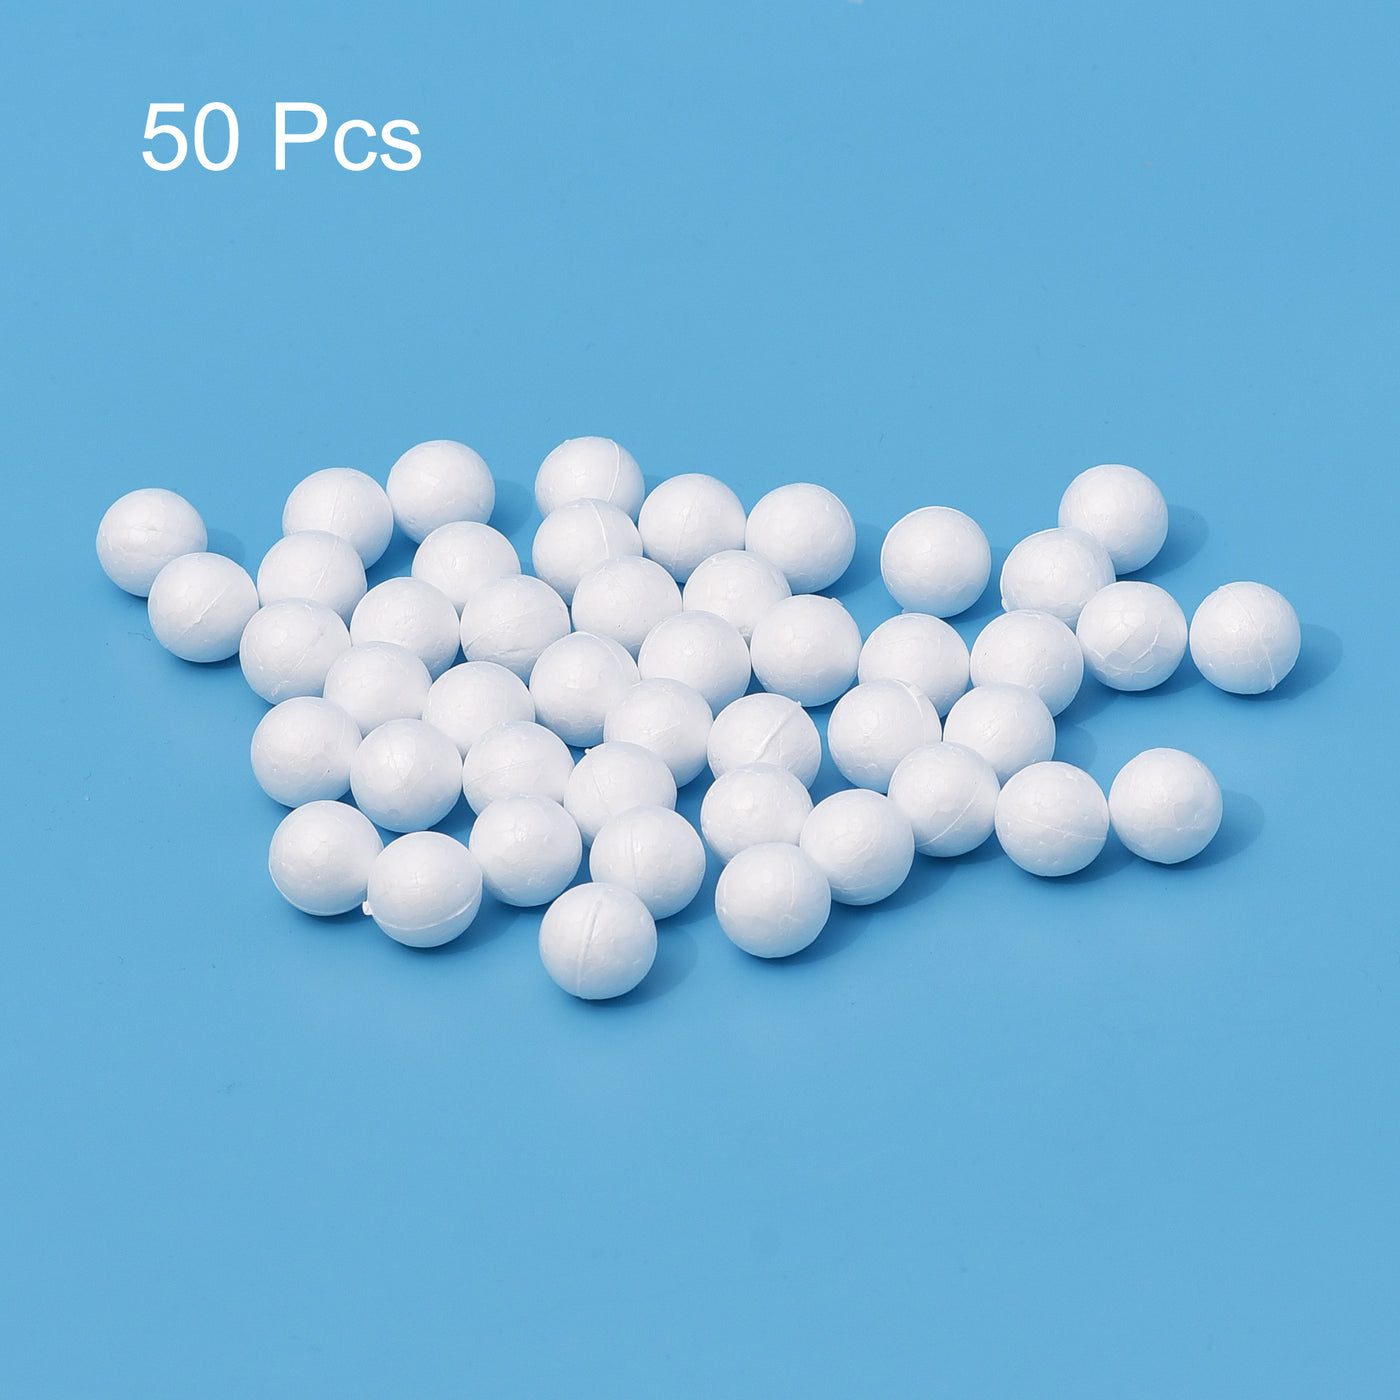 Uxcell Uxcell 50Pcs 1.5" White Polystyrene Foam Solid Balls for Crafts and Party Decorations